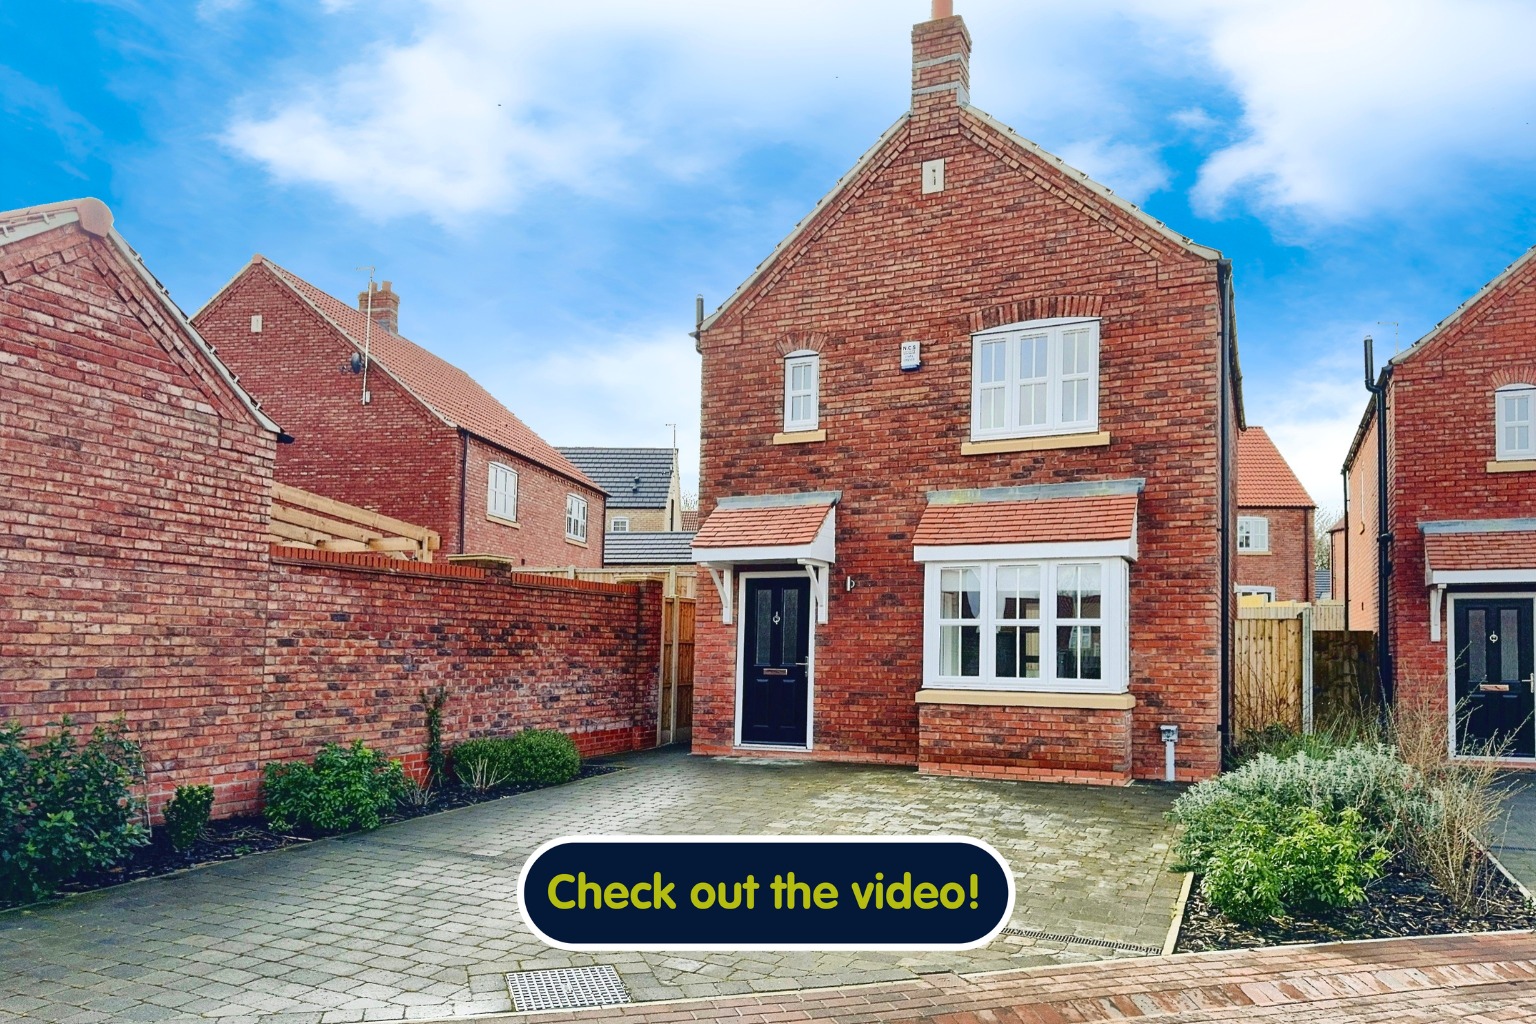 3 bed detached house for sale, Beverley - Property Image 1